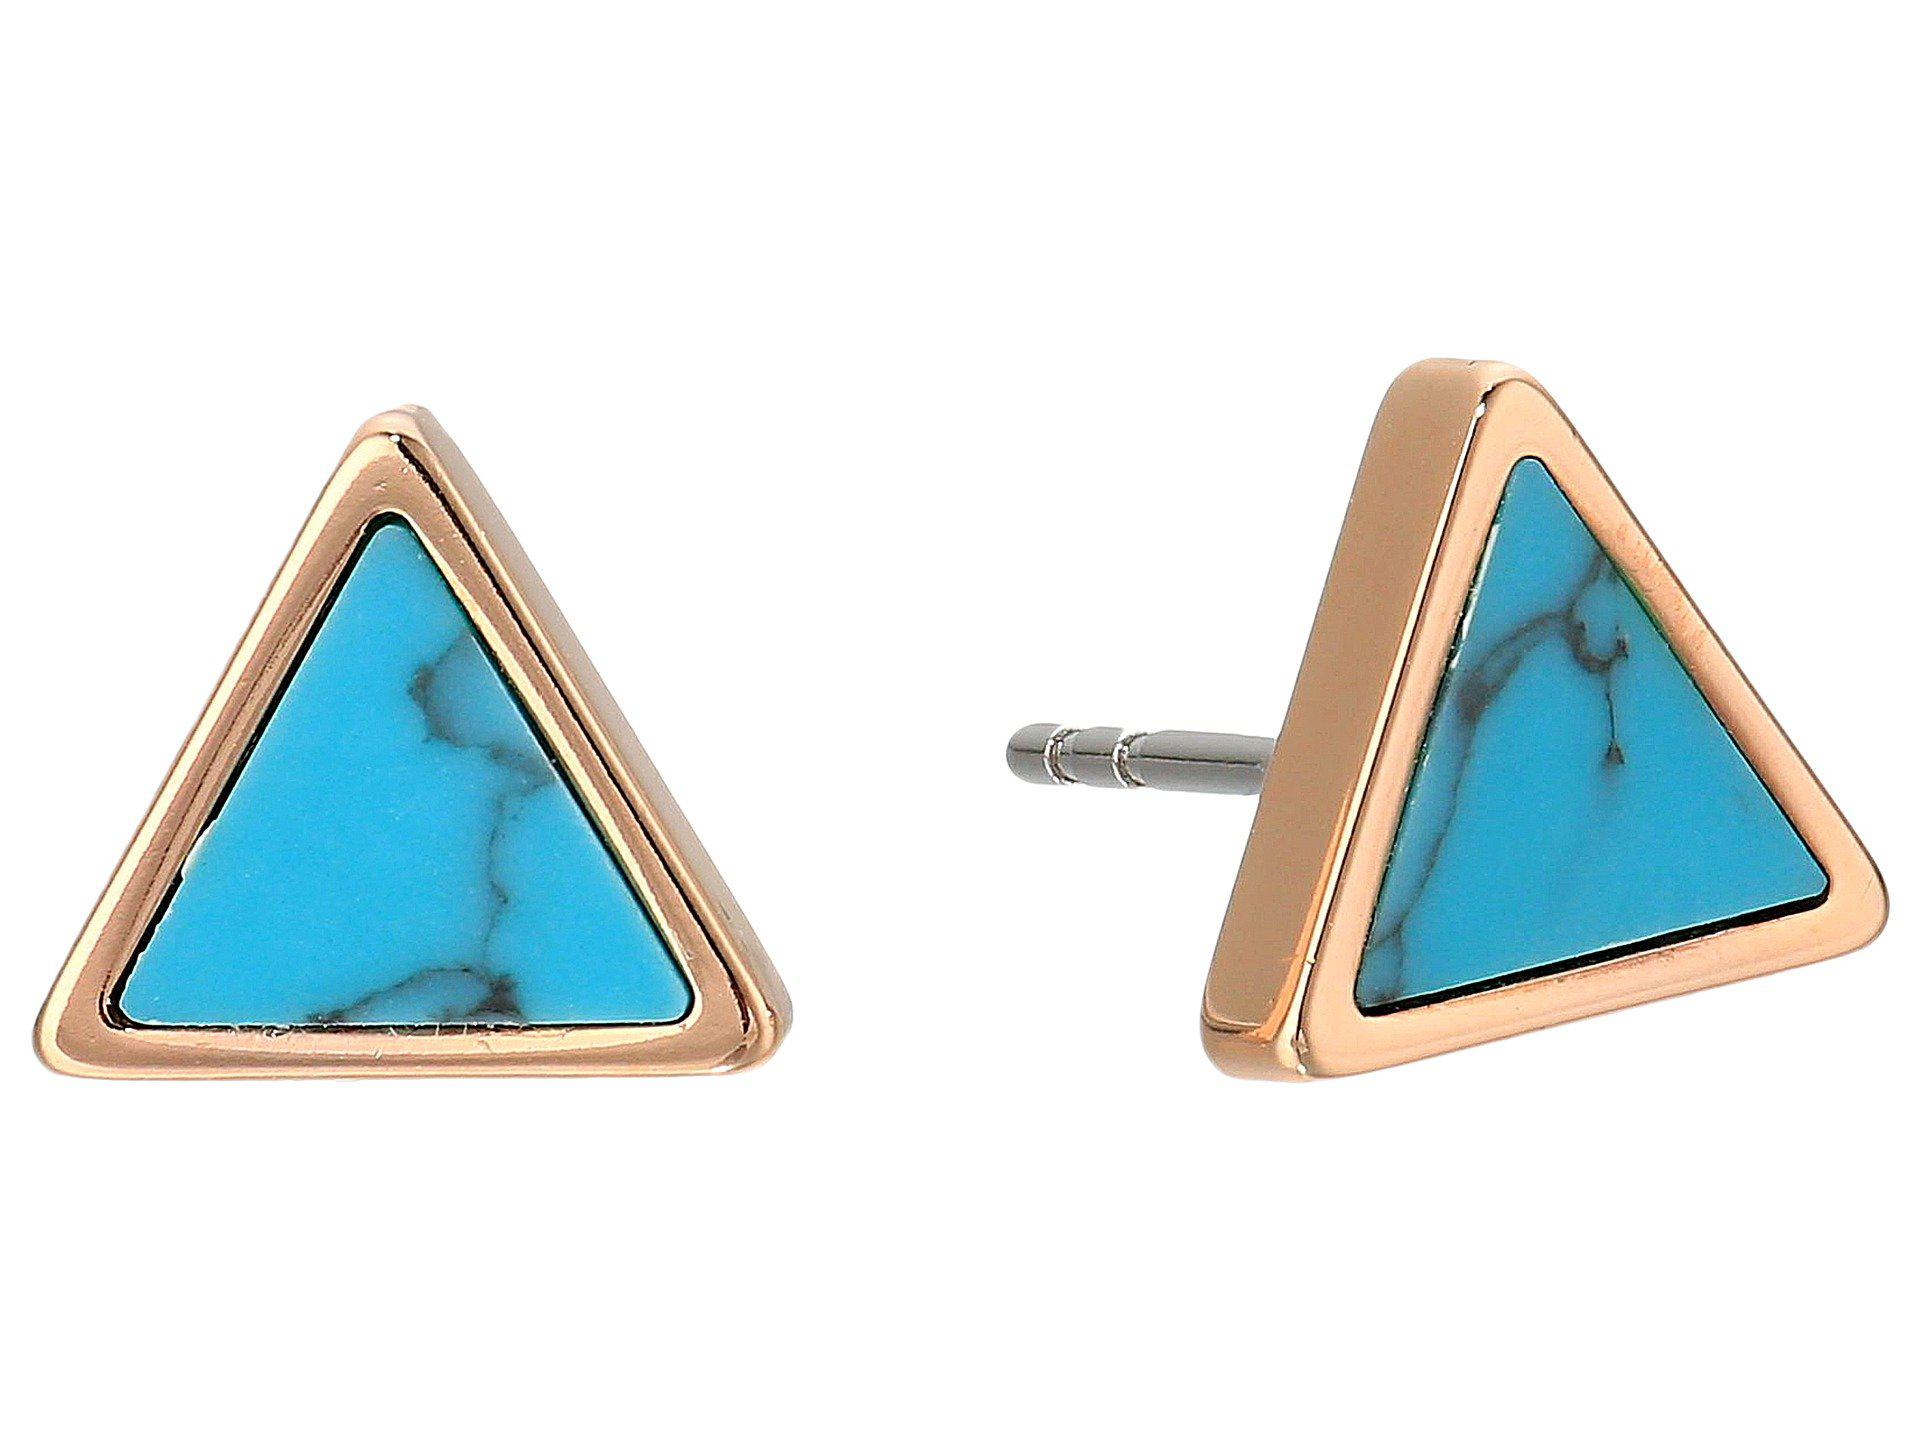 Turquoise triangle earrings